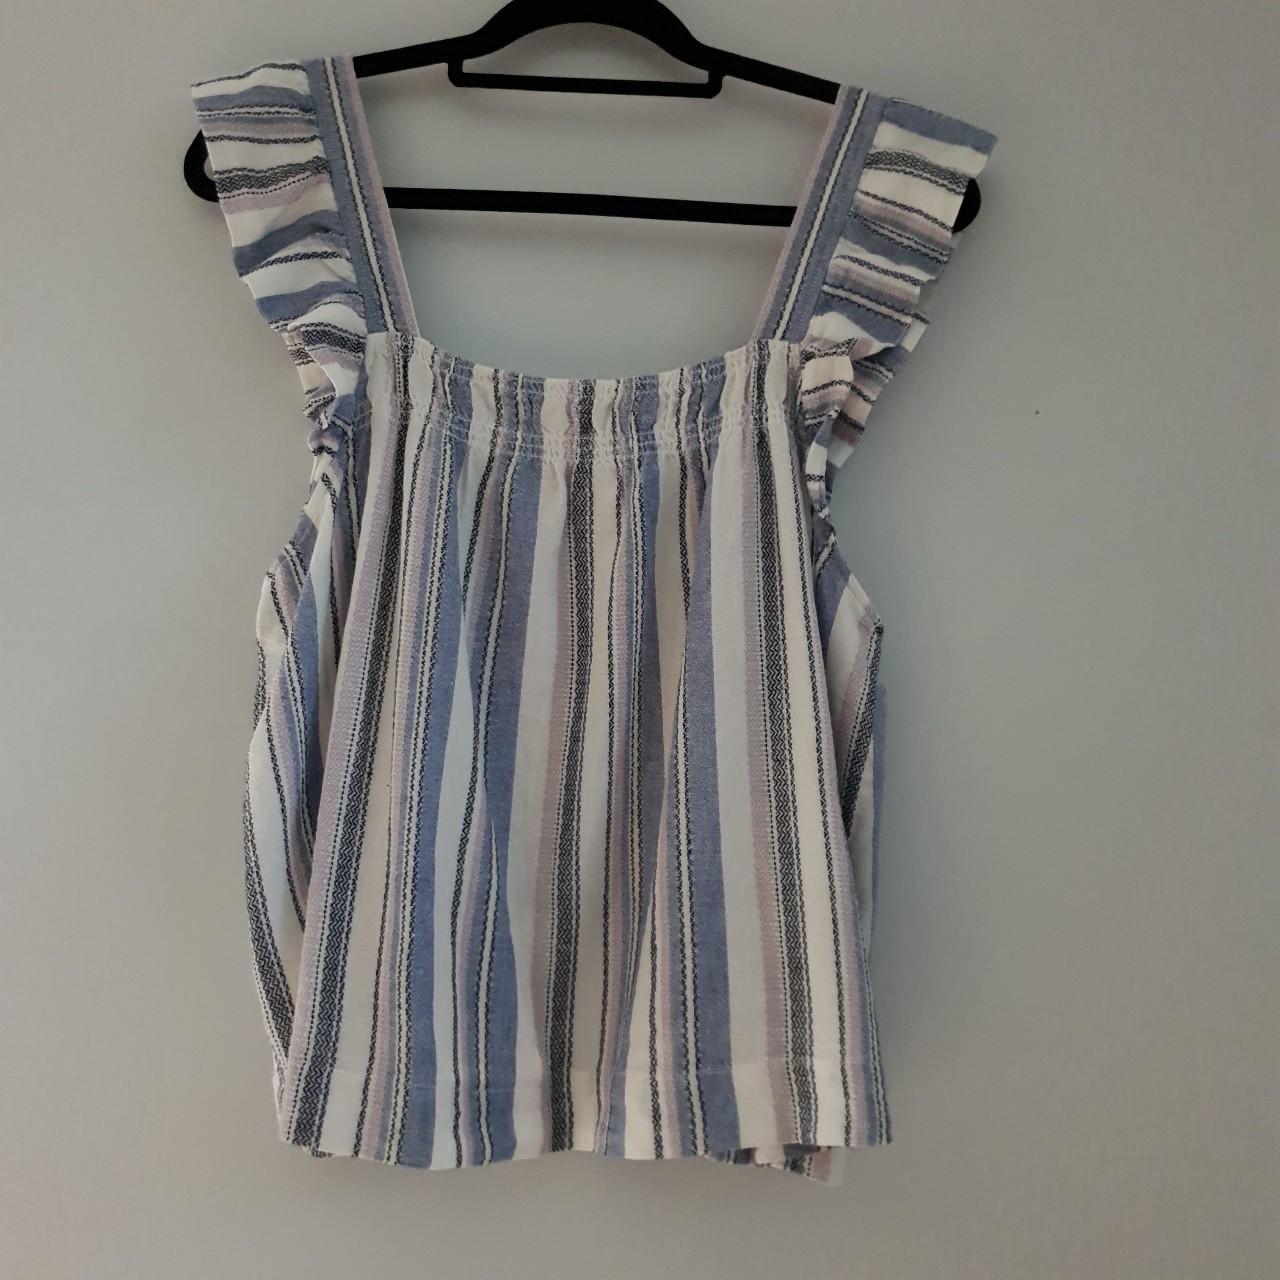 Gorgeous striped top in a woven linen mix by... - Depop